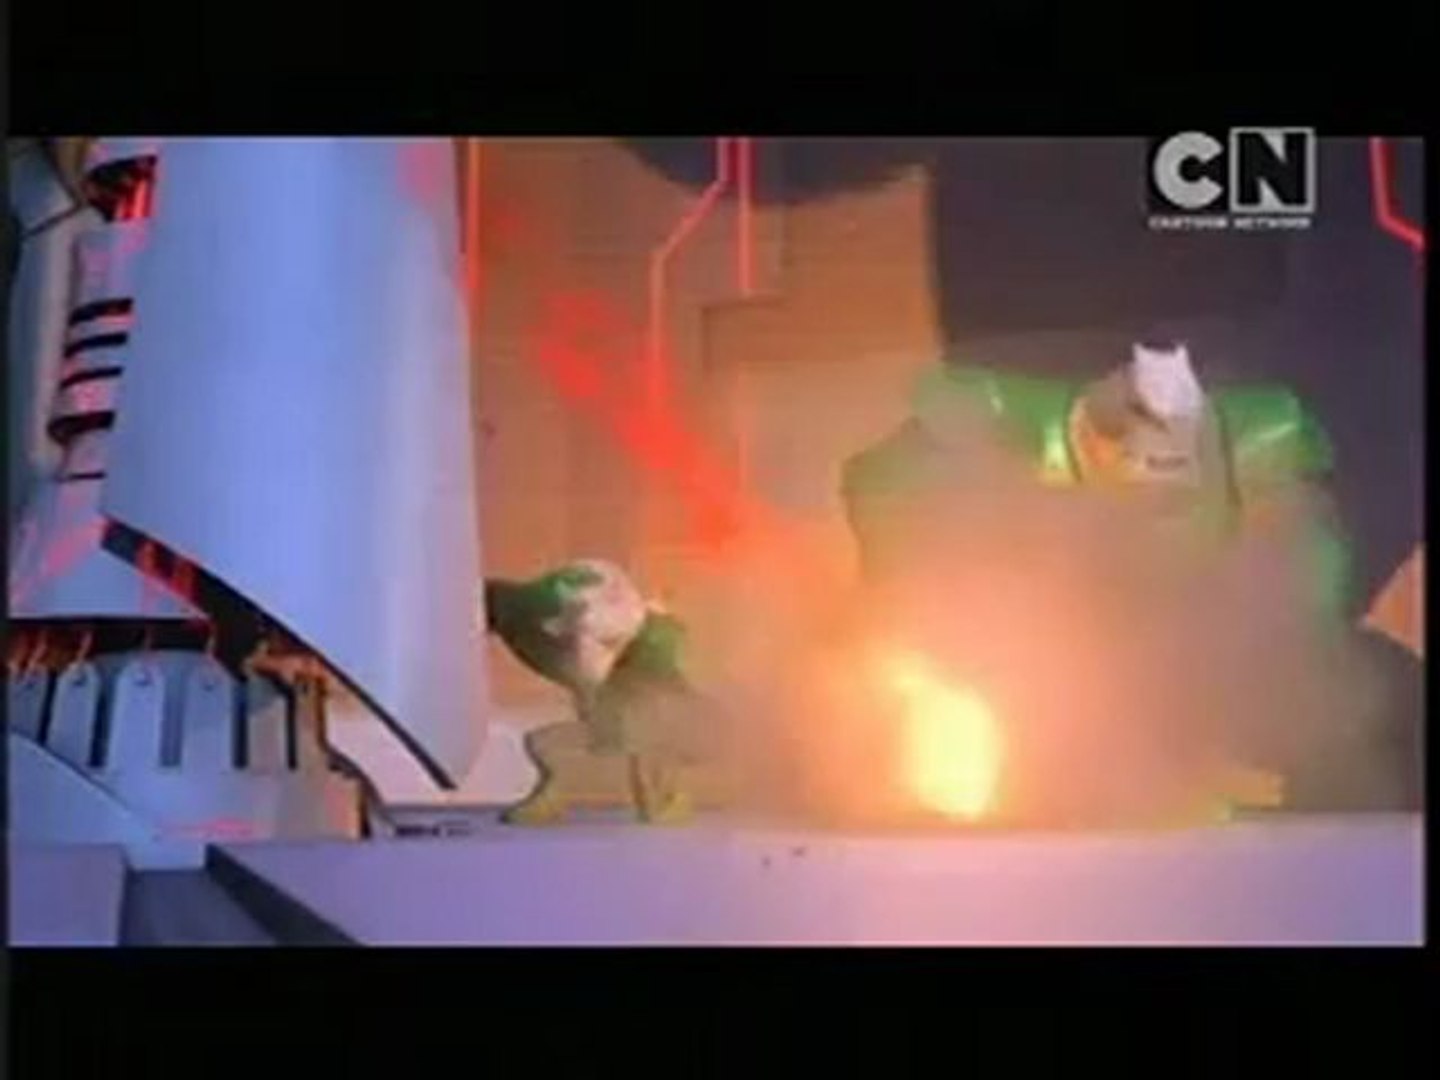 Green Lantern : The Animated Series Episode 2 in Hindi - video Dailymotion